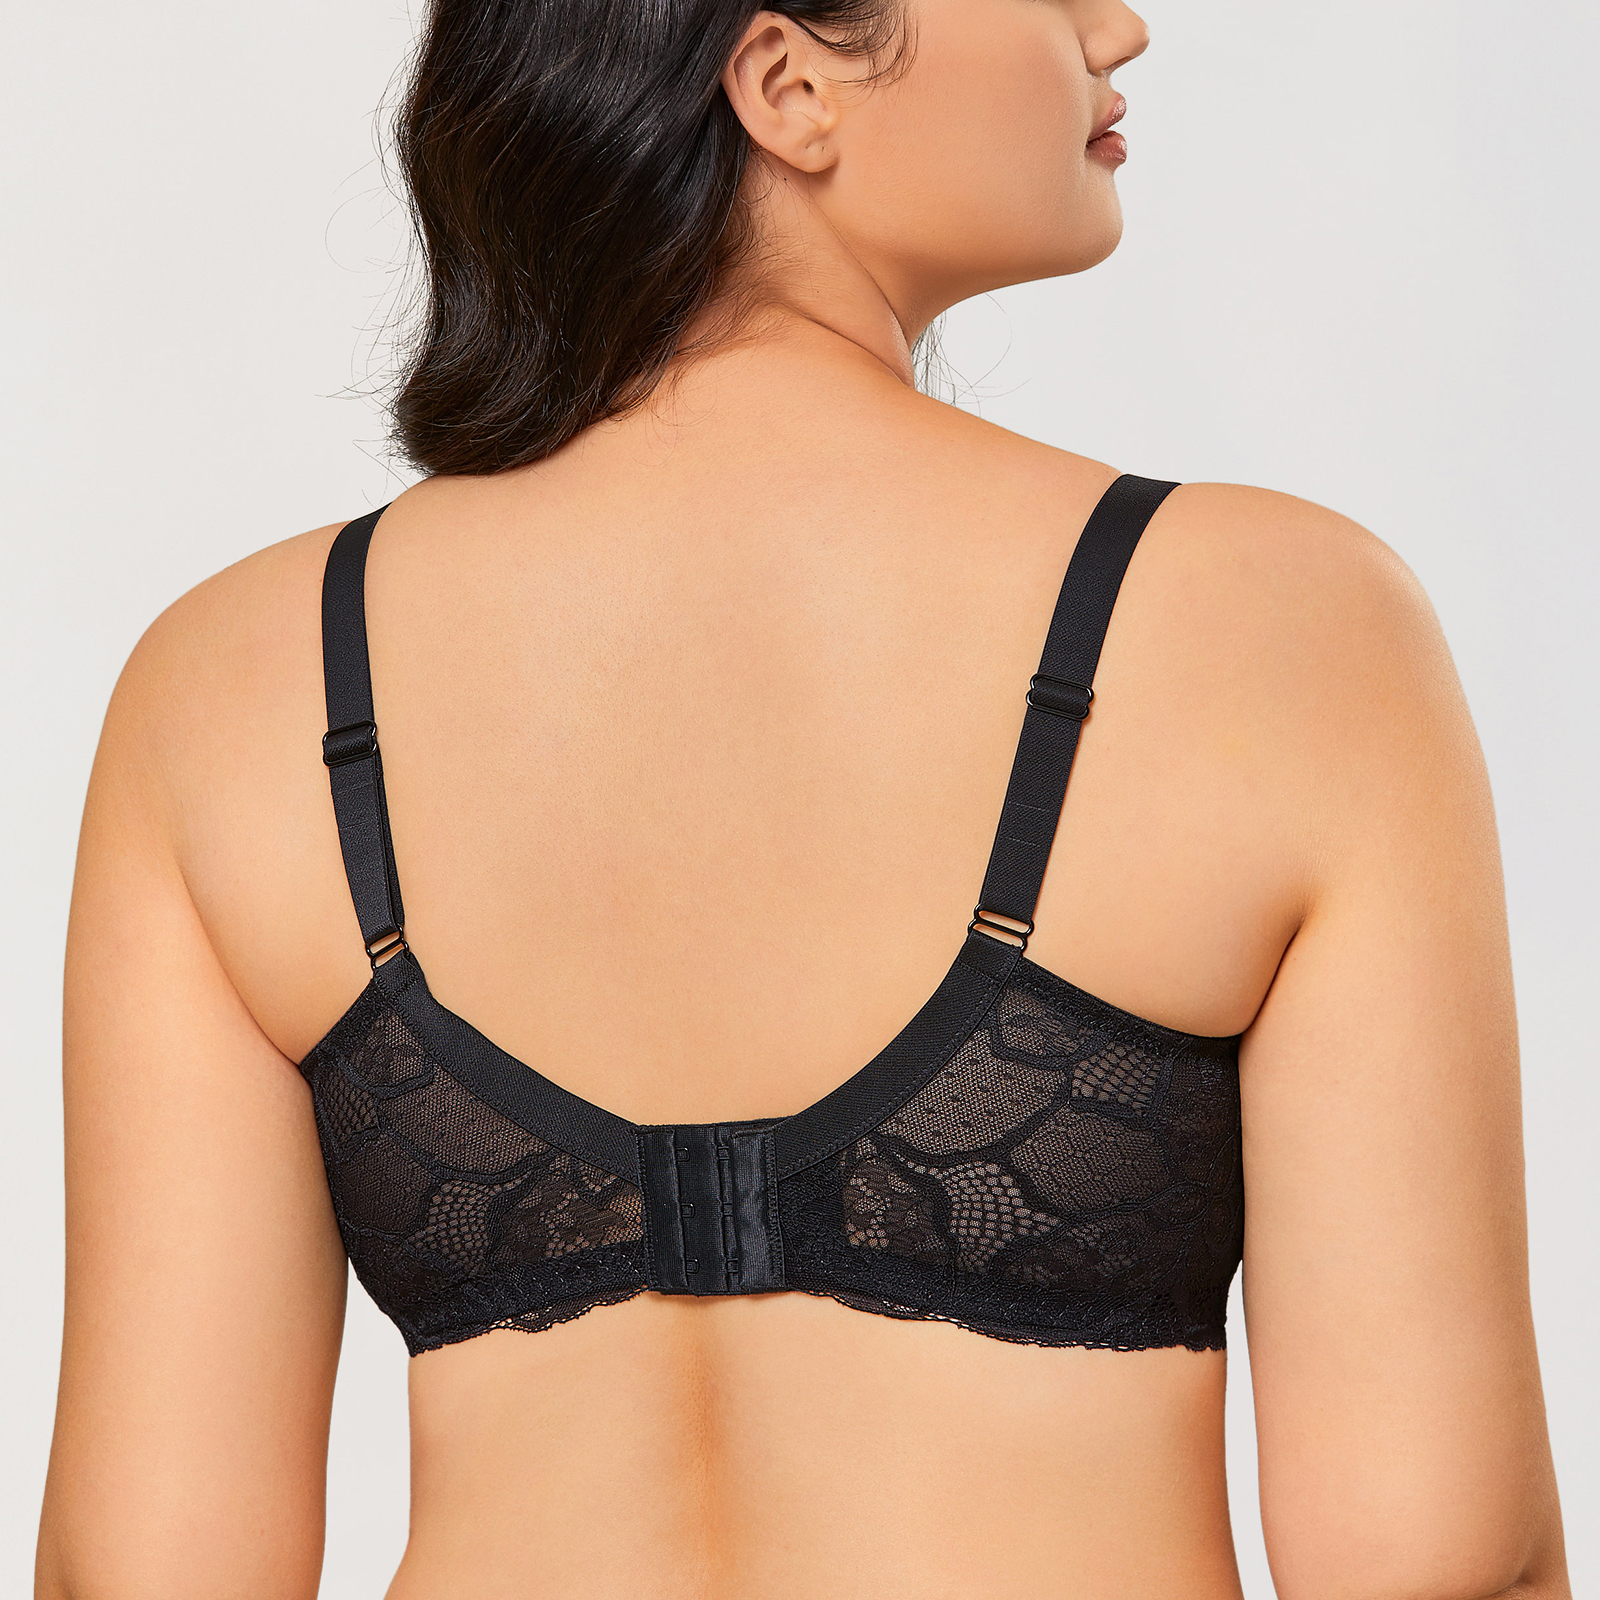 DOBREVA Womens Wireless Minimizer Lace Bra Full Coverage Plus Size Unlined  Bralette A E Cup 210623 From Dou01, $13.45